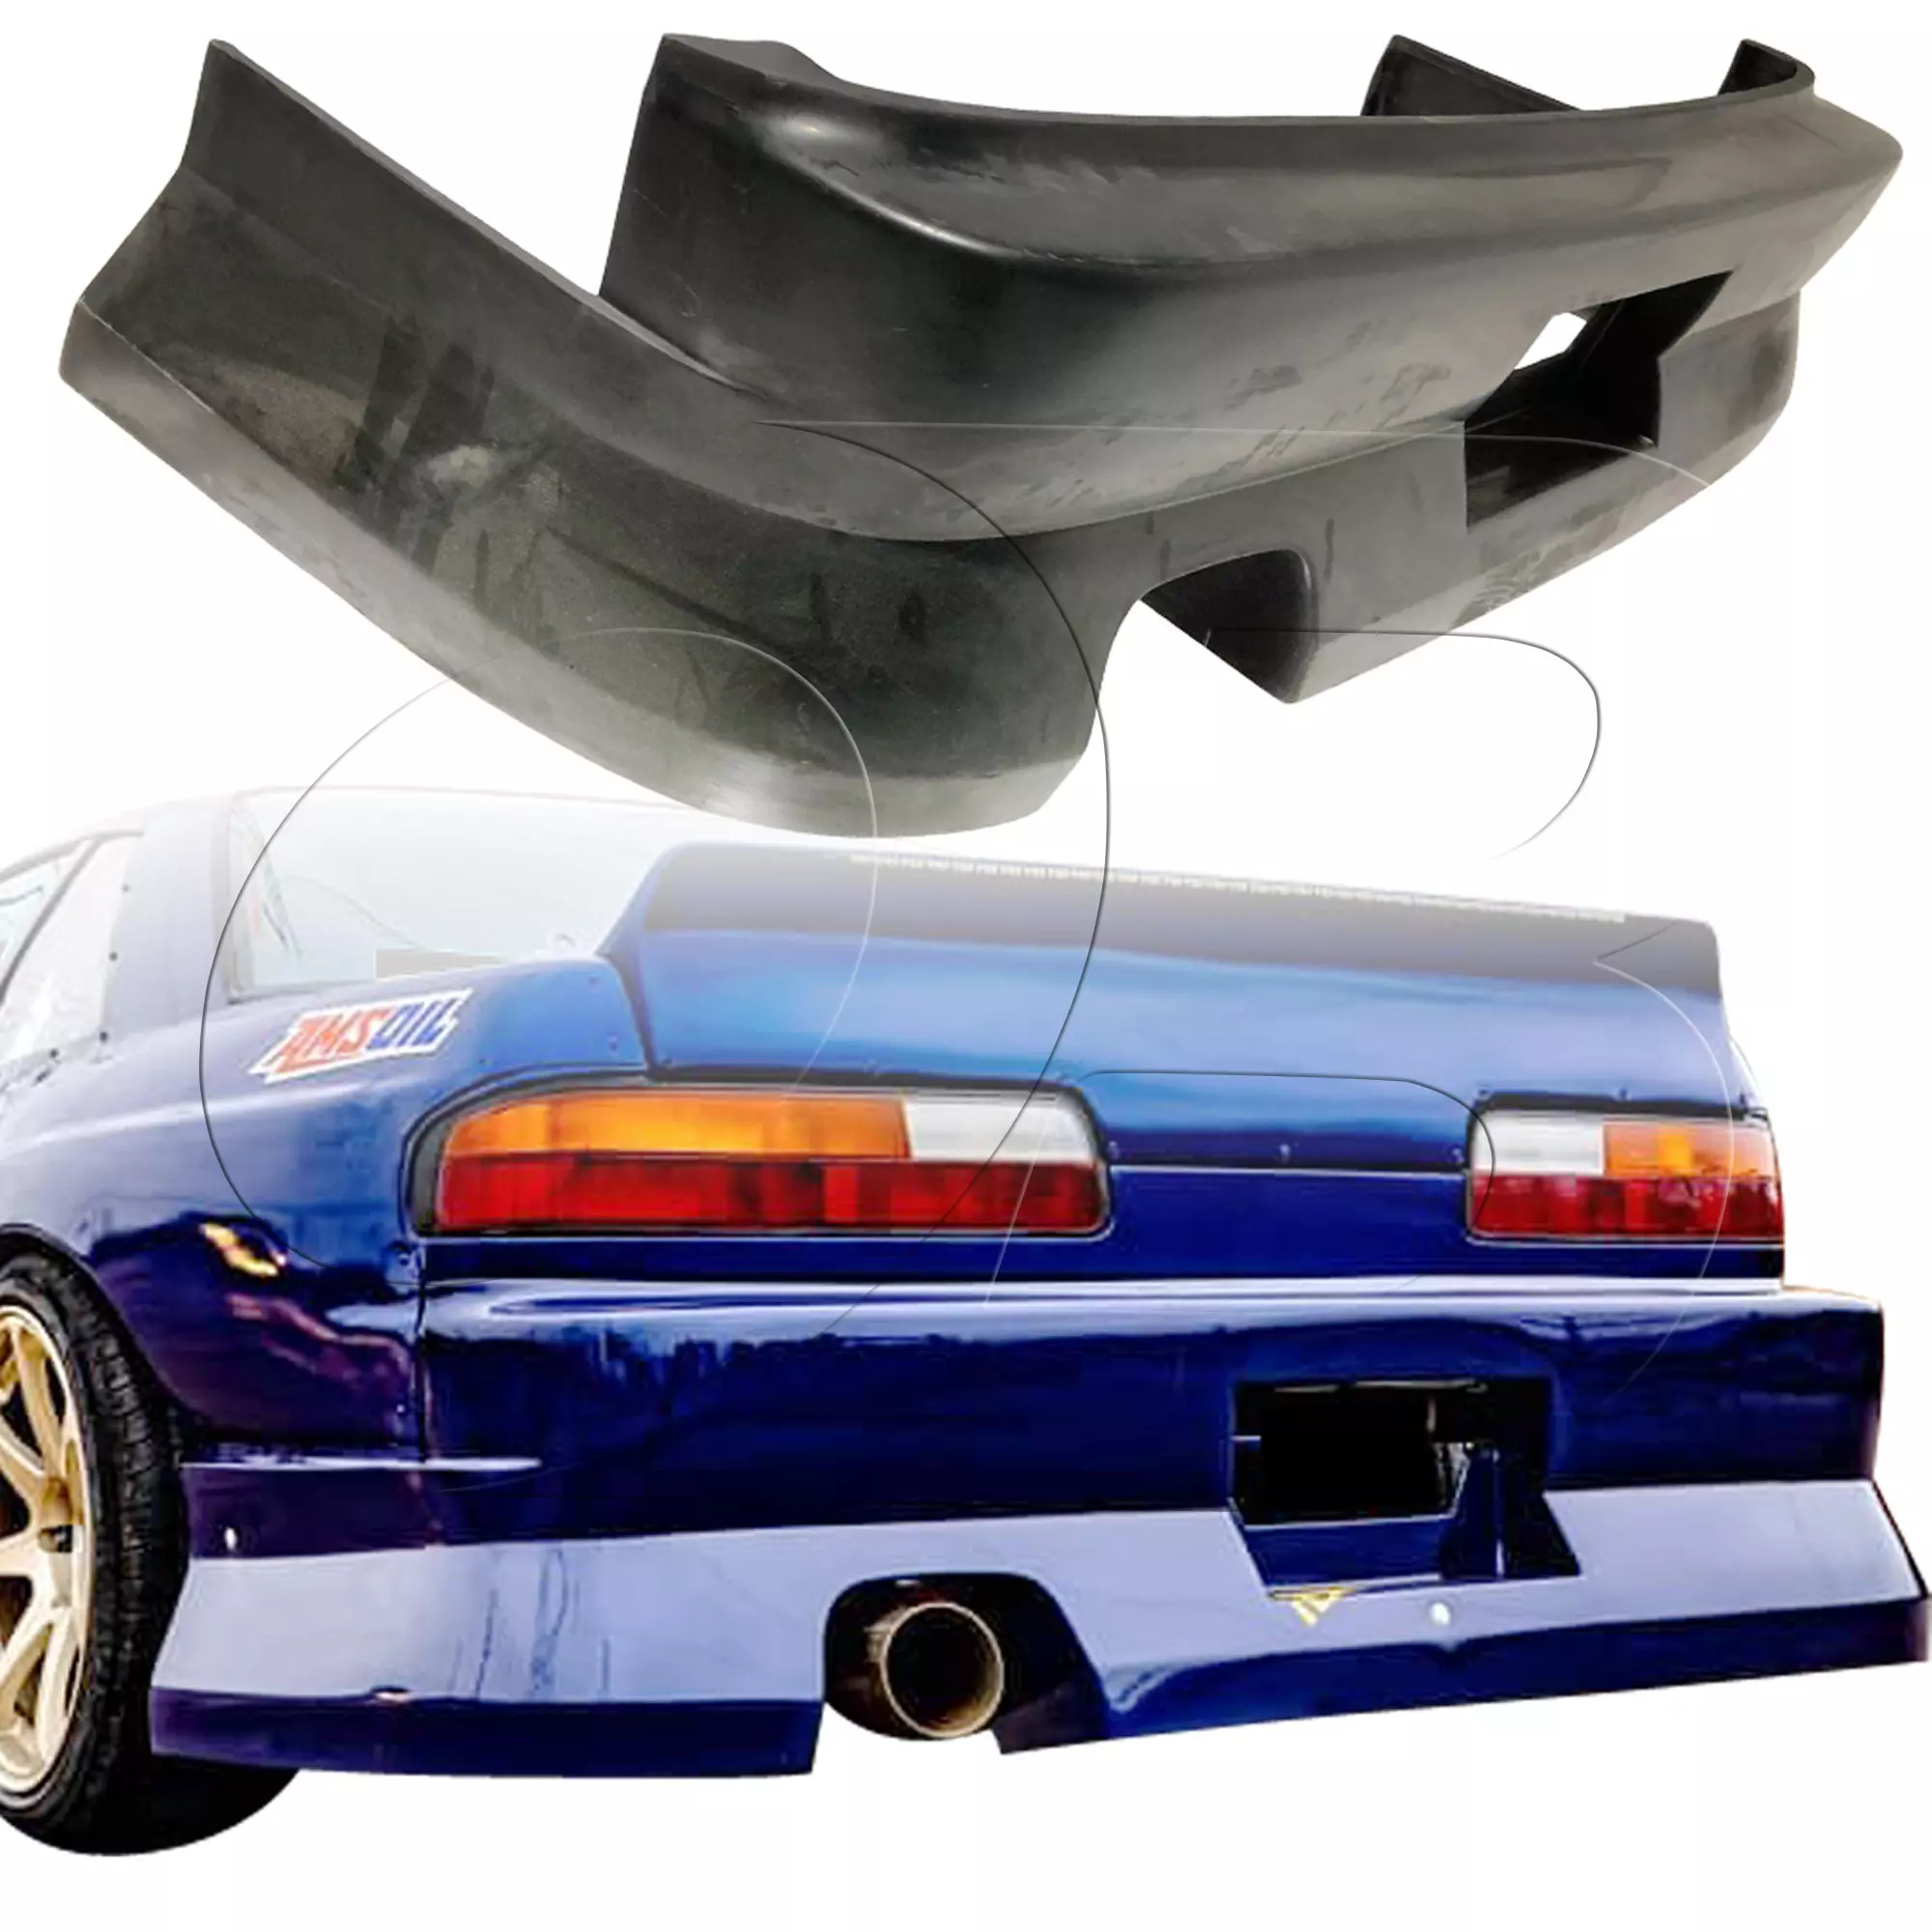 KBD Urethane Bsport2 Style 4pc Full Body Kit > Nissan 240SX 1989-1994 > 2dr Coupe - Image 91